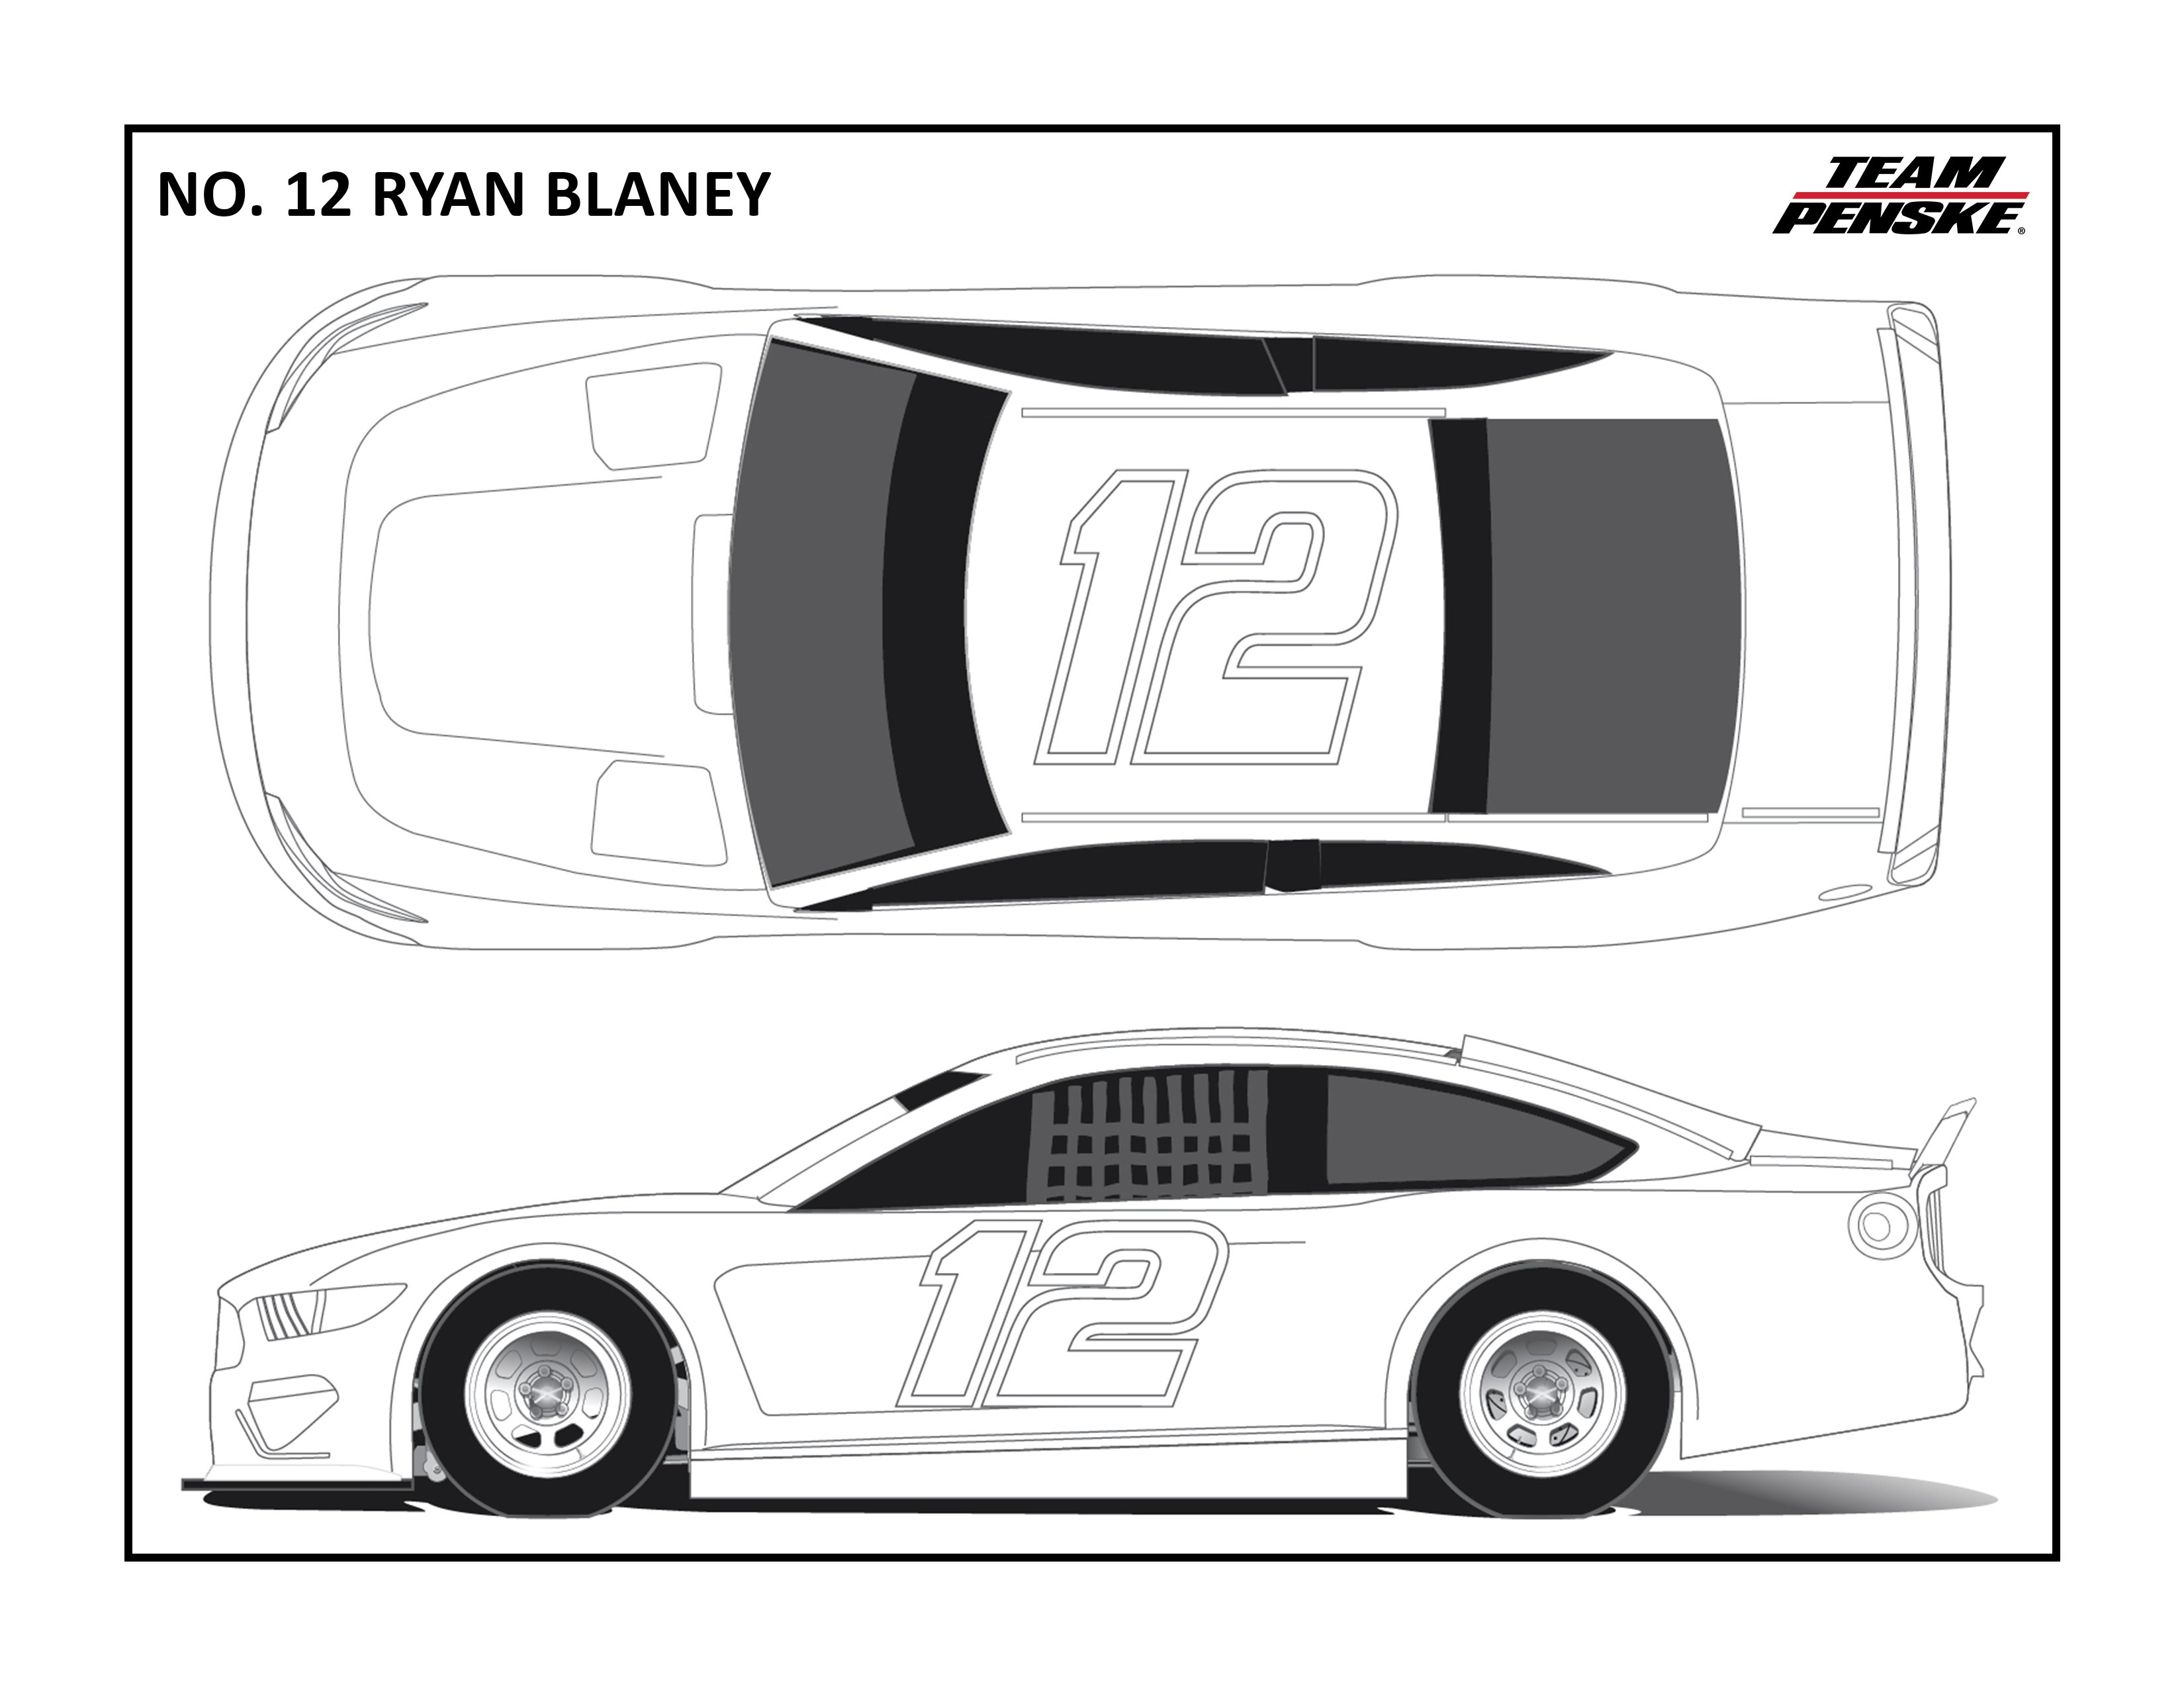 Team penske on x have kiddos looking for a fun project ð head to our website for all of our team penske inspired coloring pages word searches and crossword puzzles ð httpstcoetfazpvdta